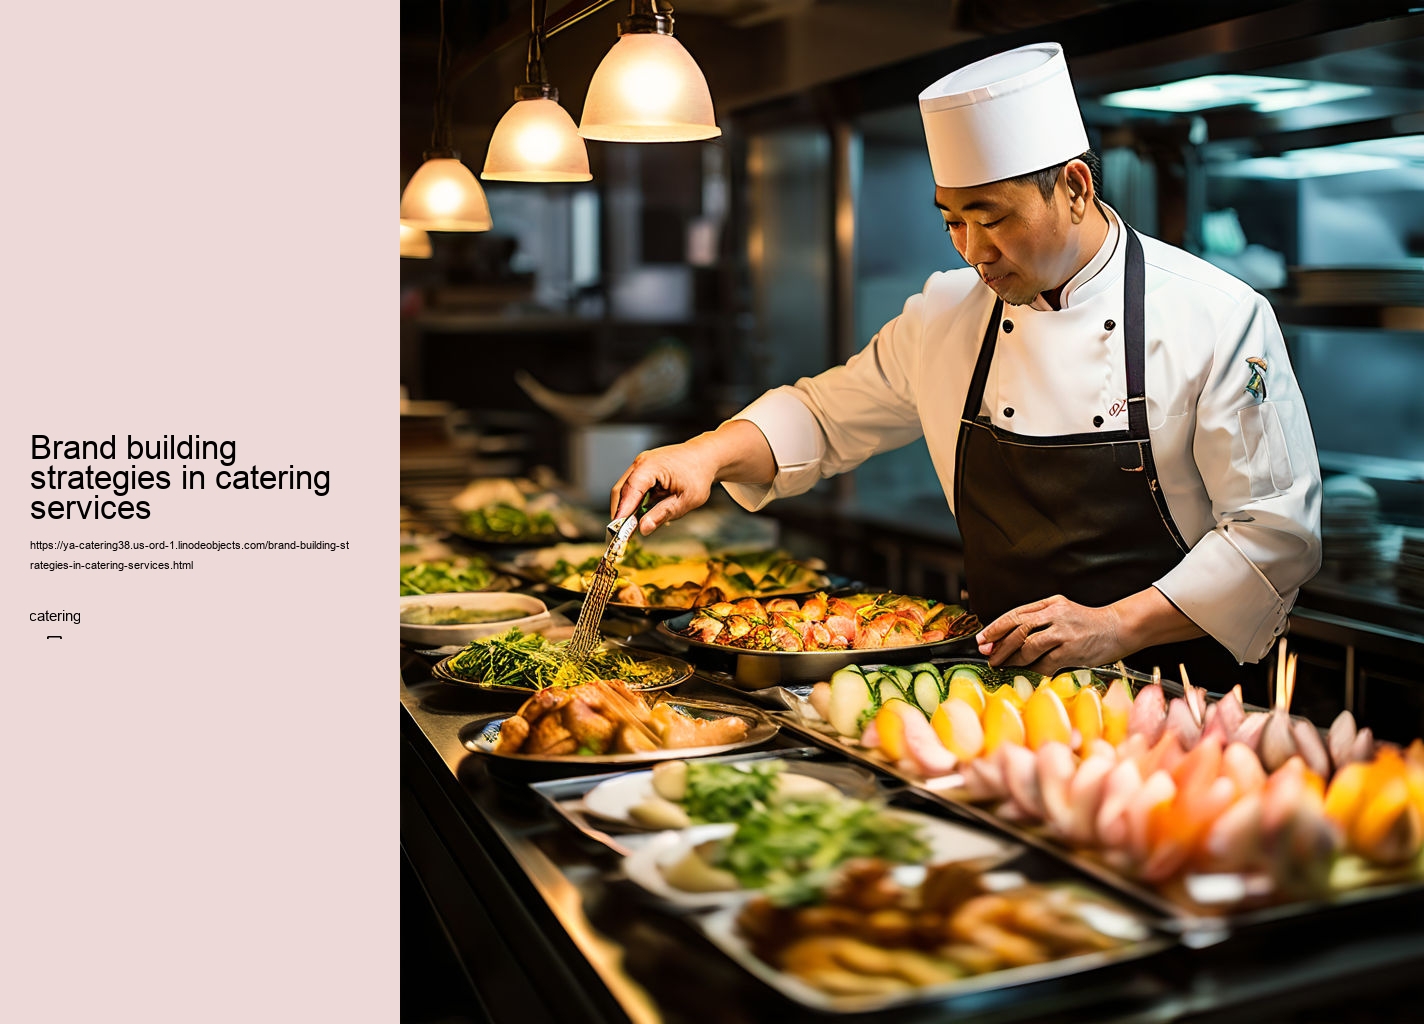 Brand building strategies in catering services